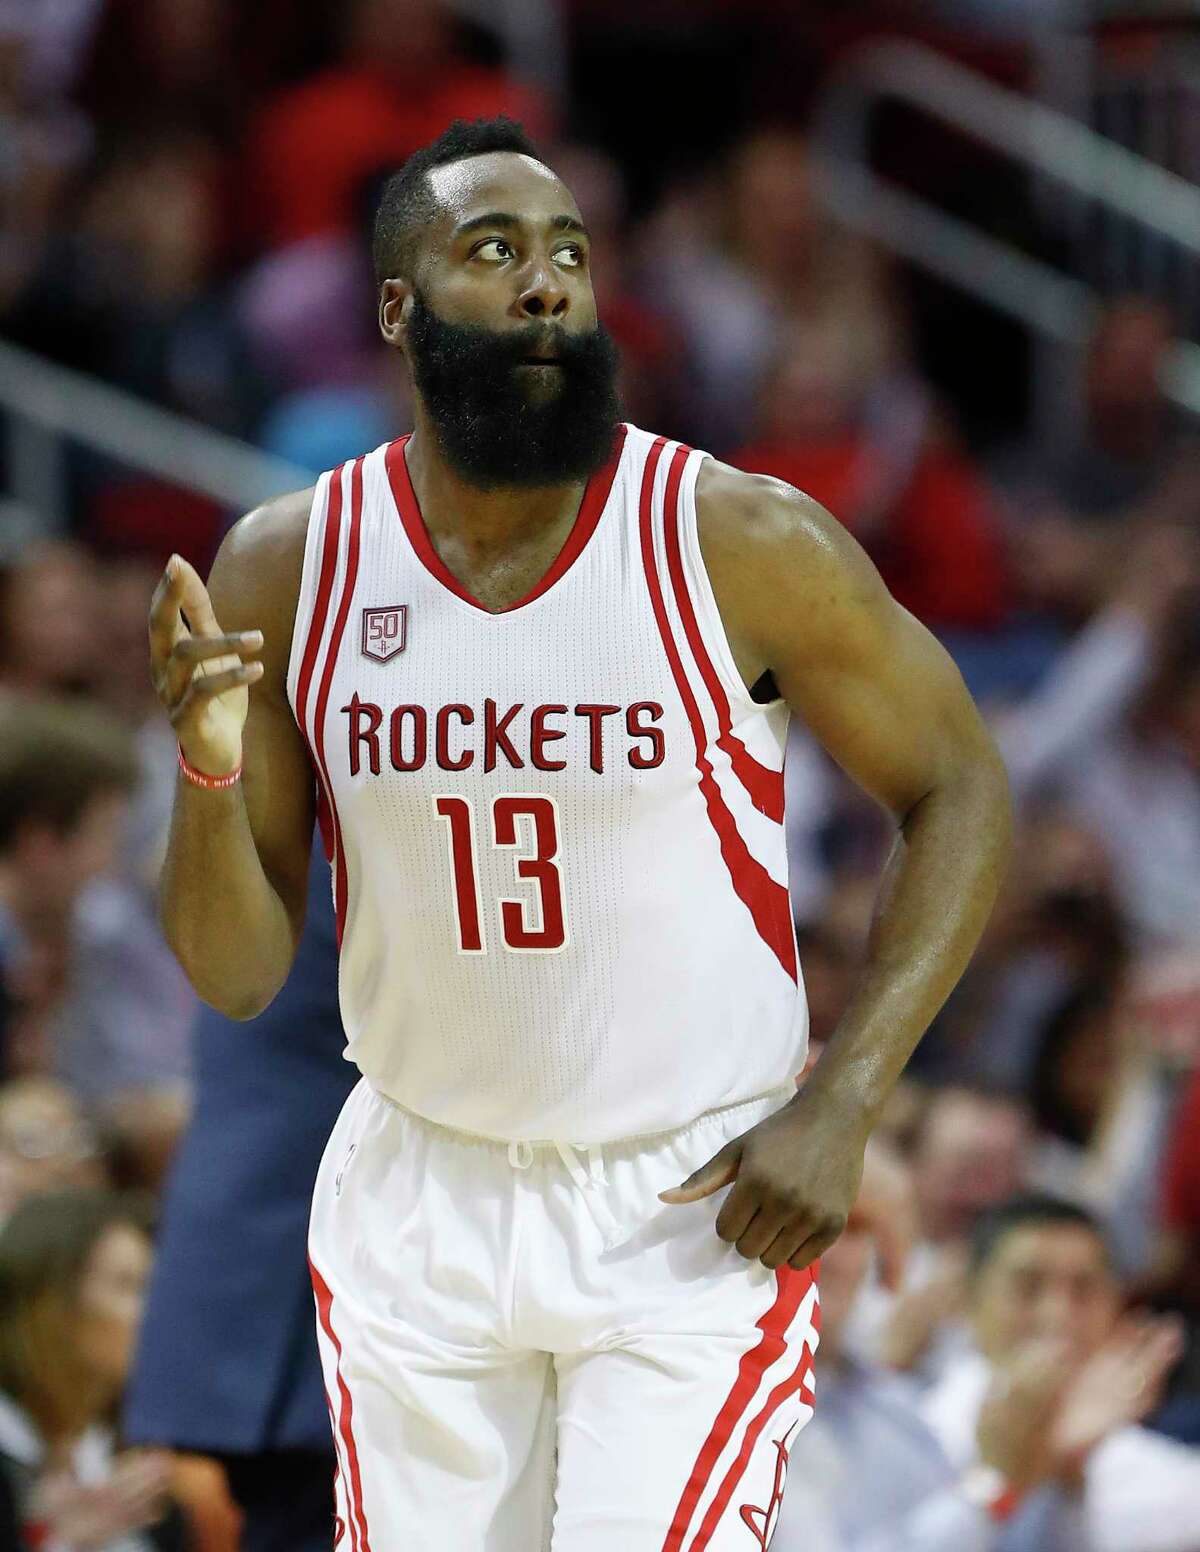 Houston Rockets: James Harden is more focused than ever before